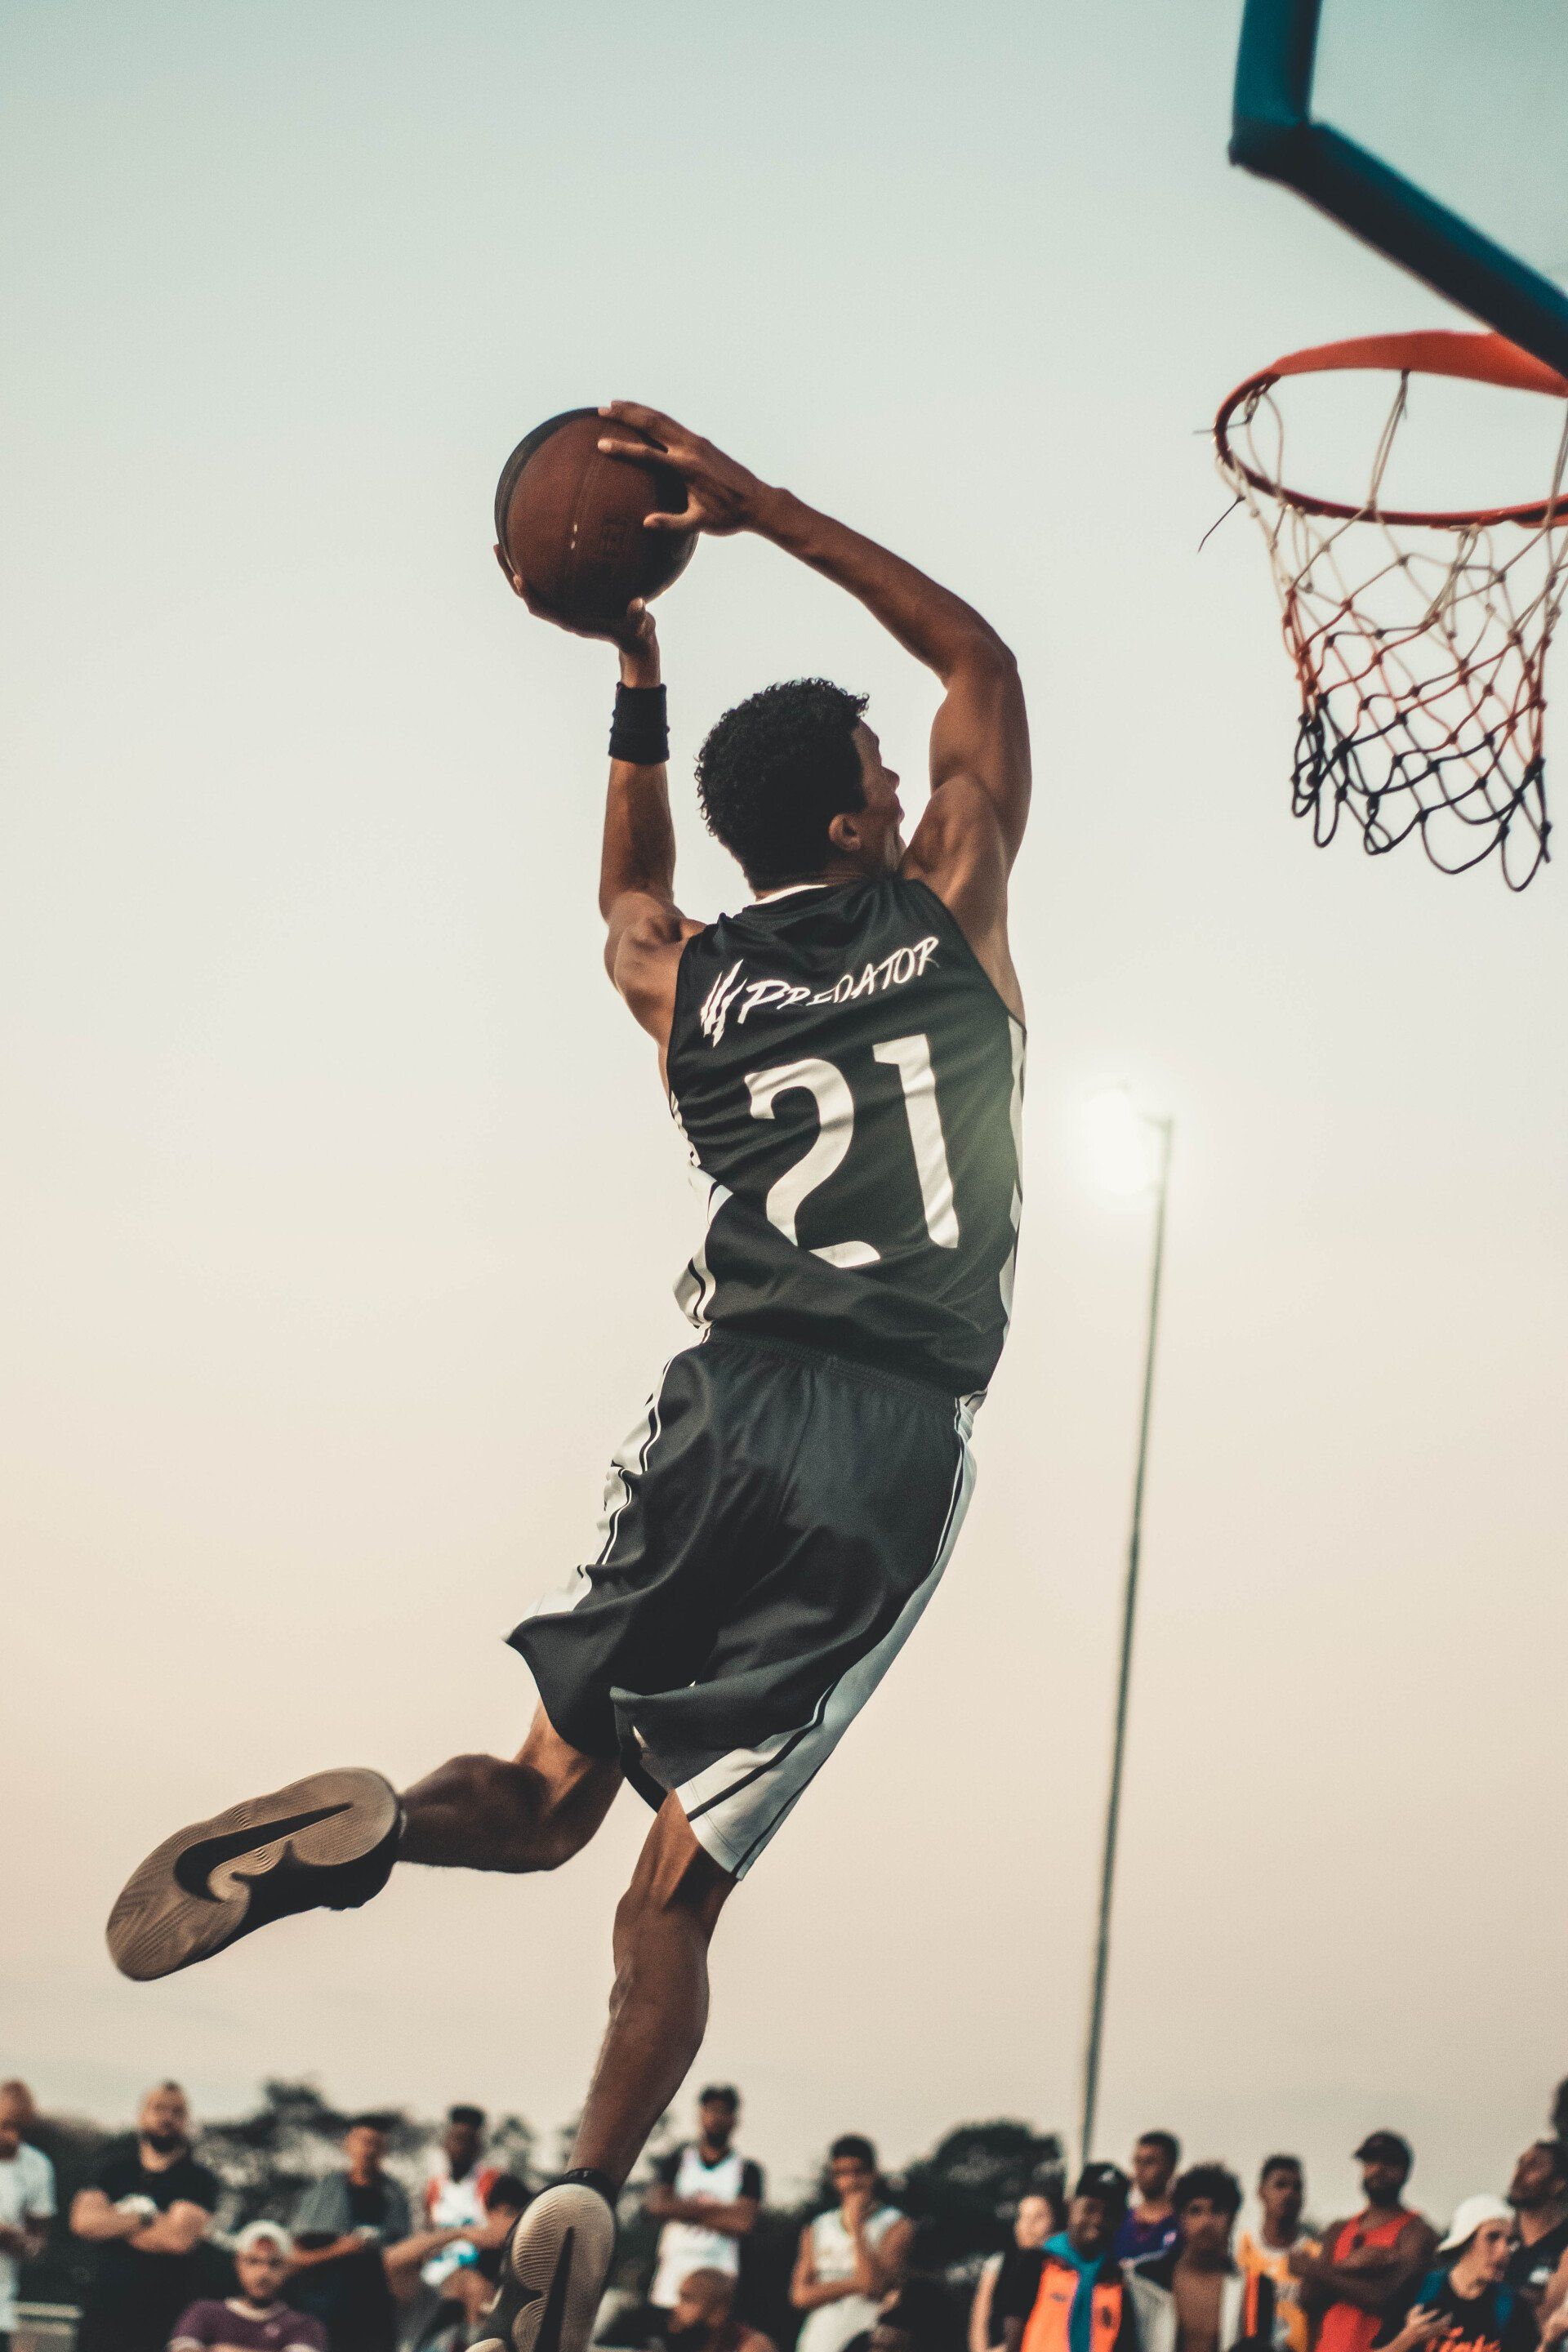 a man wearing a number 21 jersey is jumping in the air to dunk a basketball